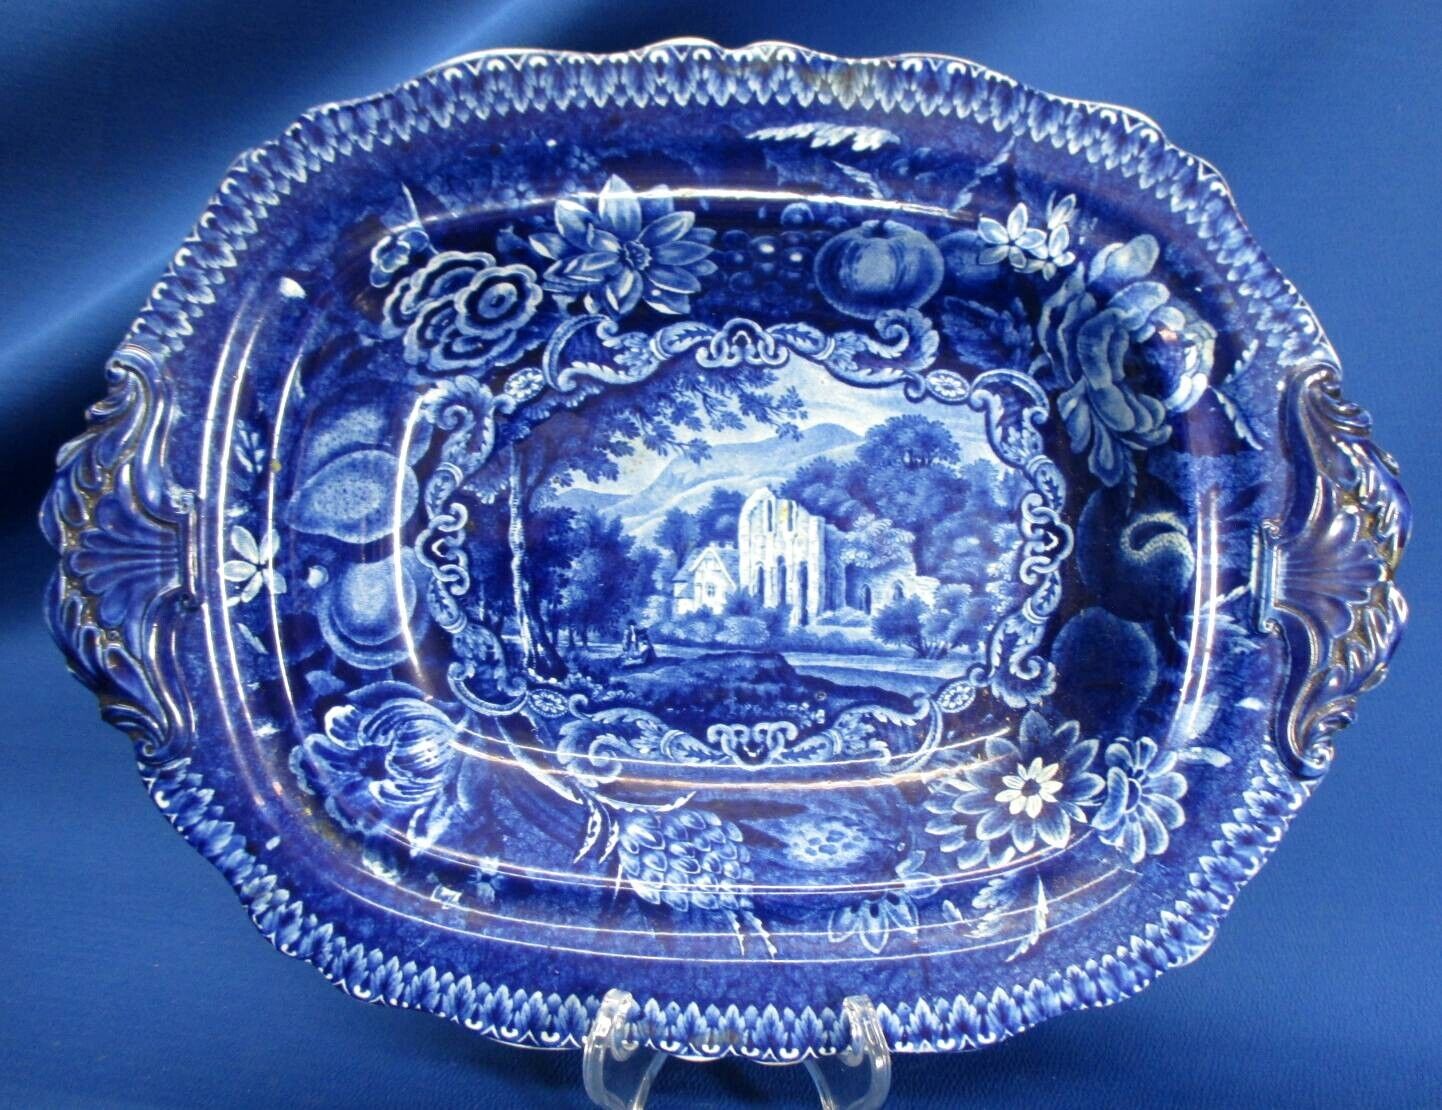 1830 R. HALL STAFFORDSHORE HISTORICAL WARE  VIEWS VALLE CRUSIS WALES  BOWL